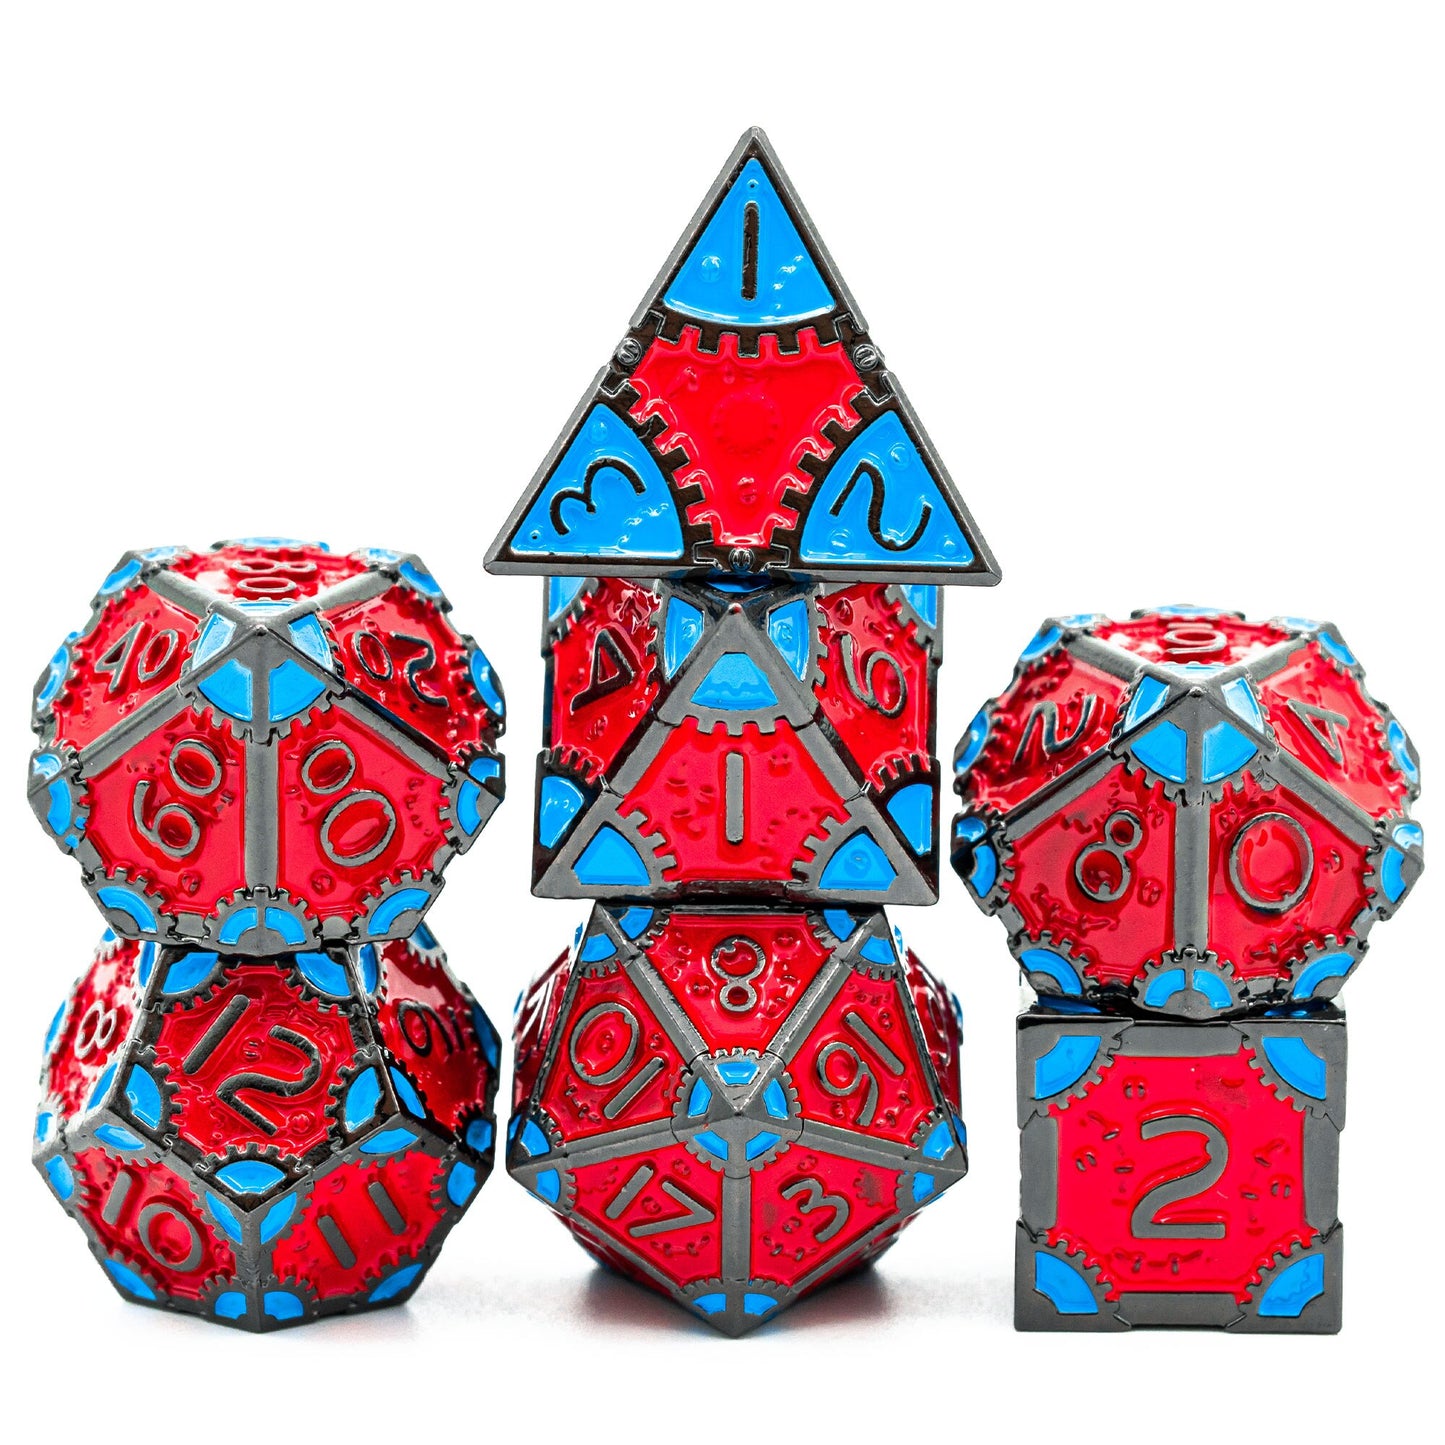 red and blue steampunk dice set